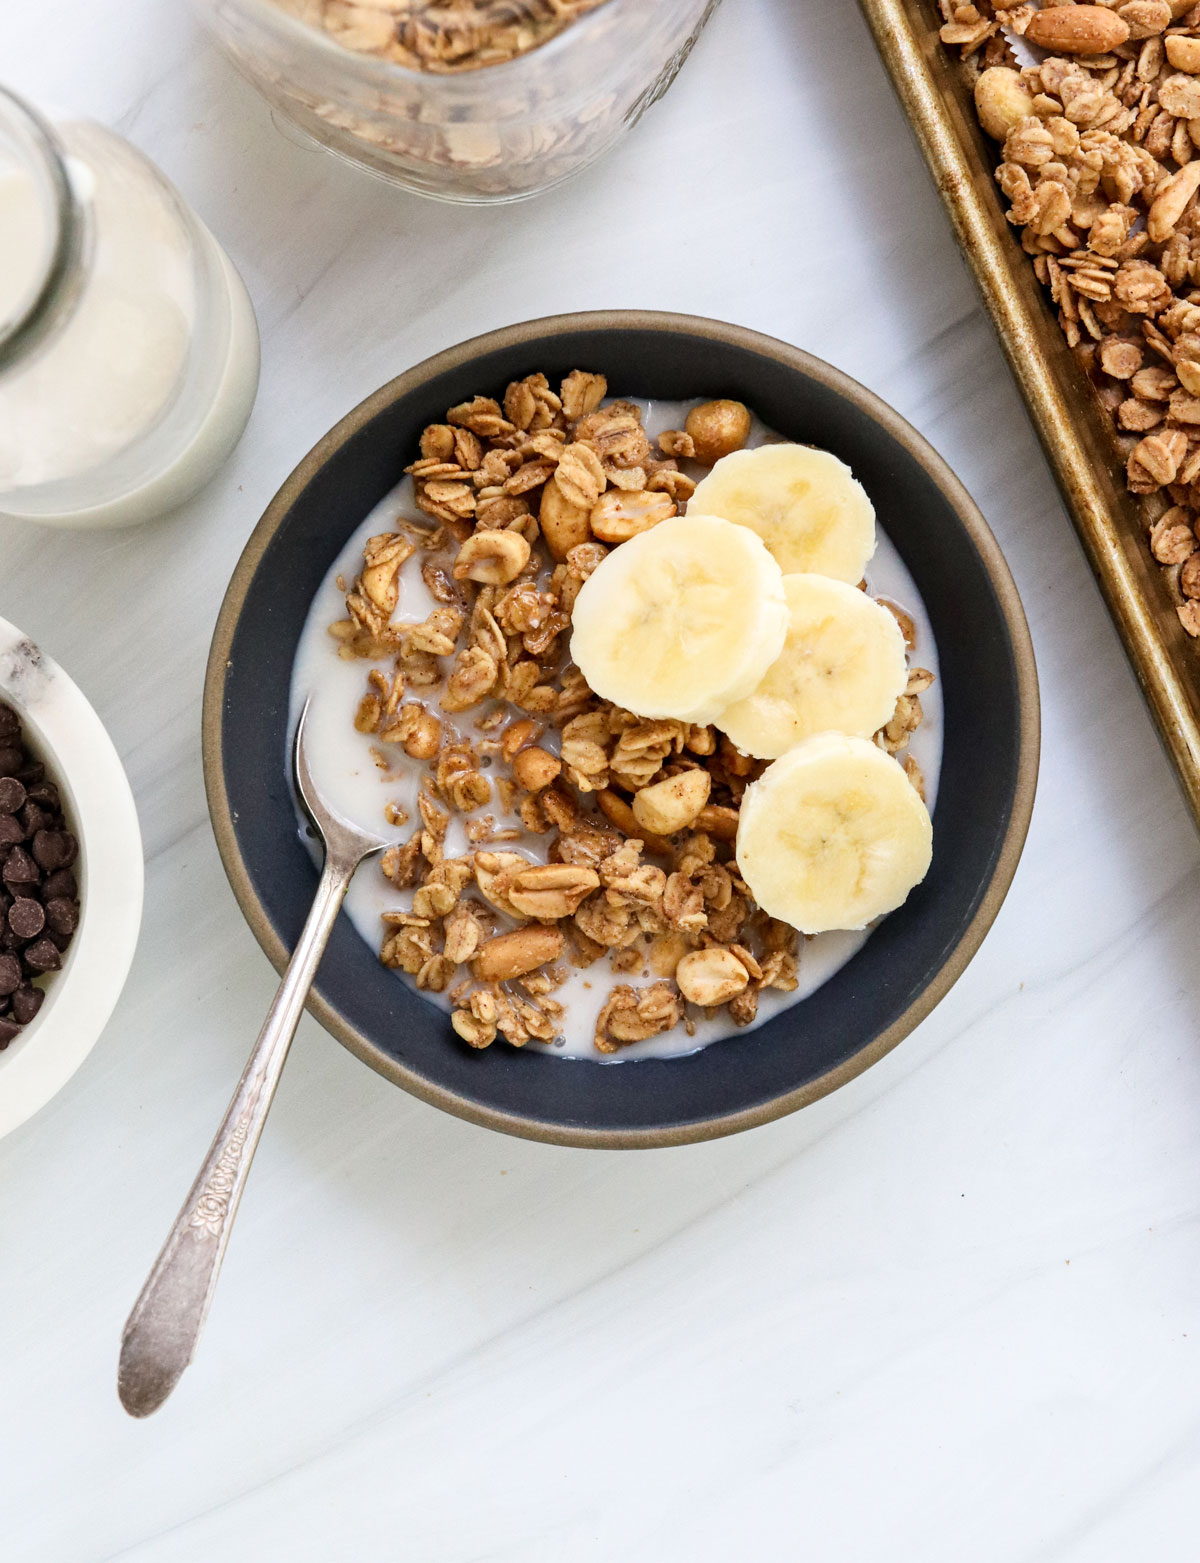 peanut butter granola served with milk and bananas.